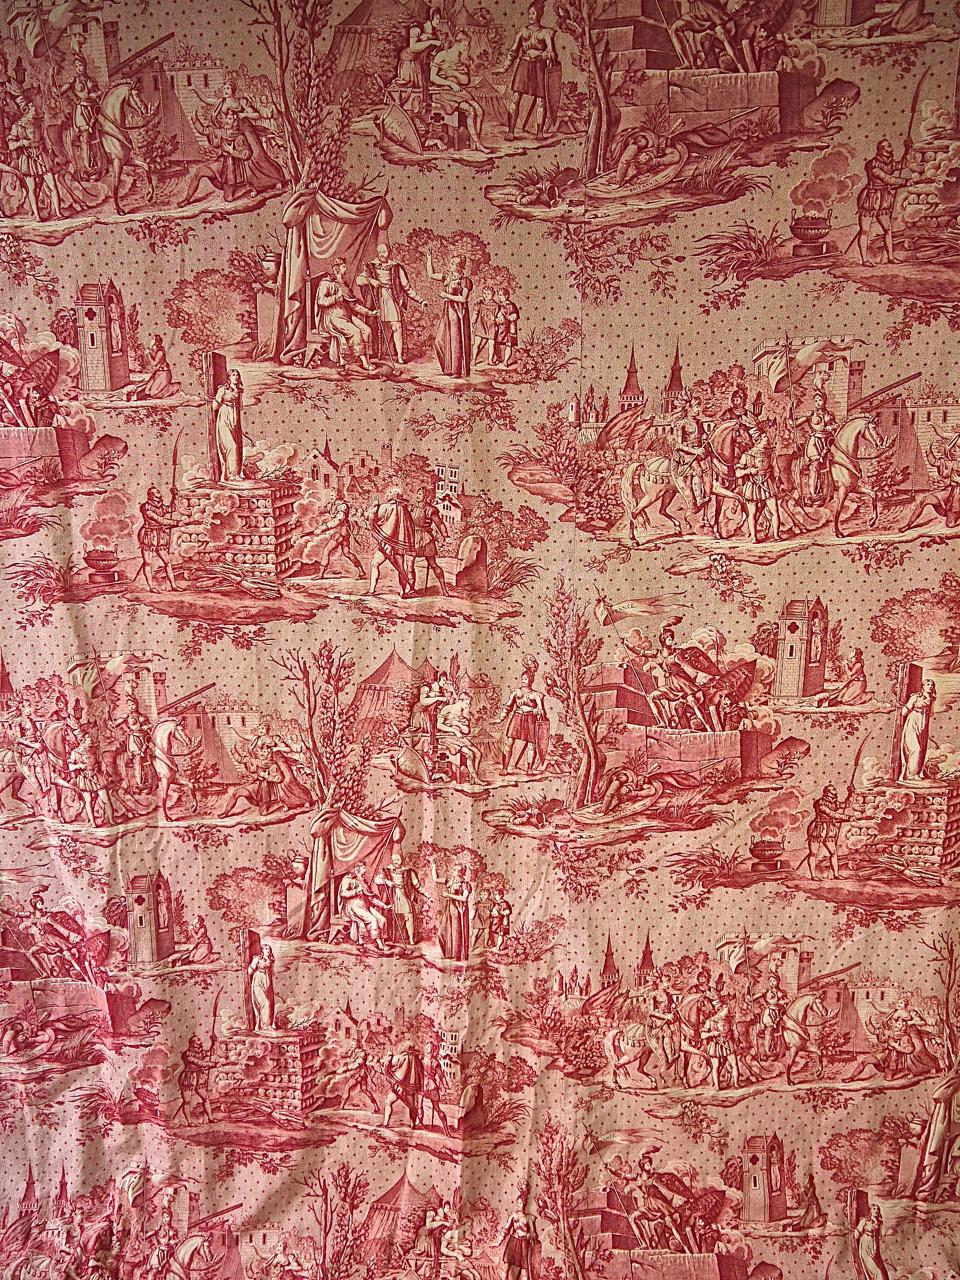 Rare toile 'La Vie de Jeanne d' Arc' from Bolbec in Northern France with various scenes from the life of Joan of Arc printed in a lovely red on a stippled ground with scattered stars.